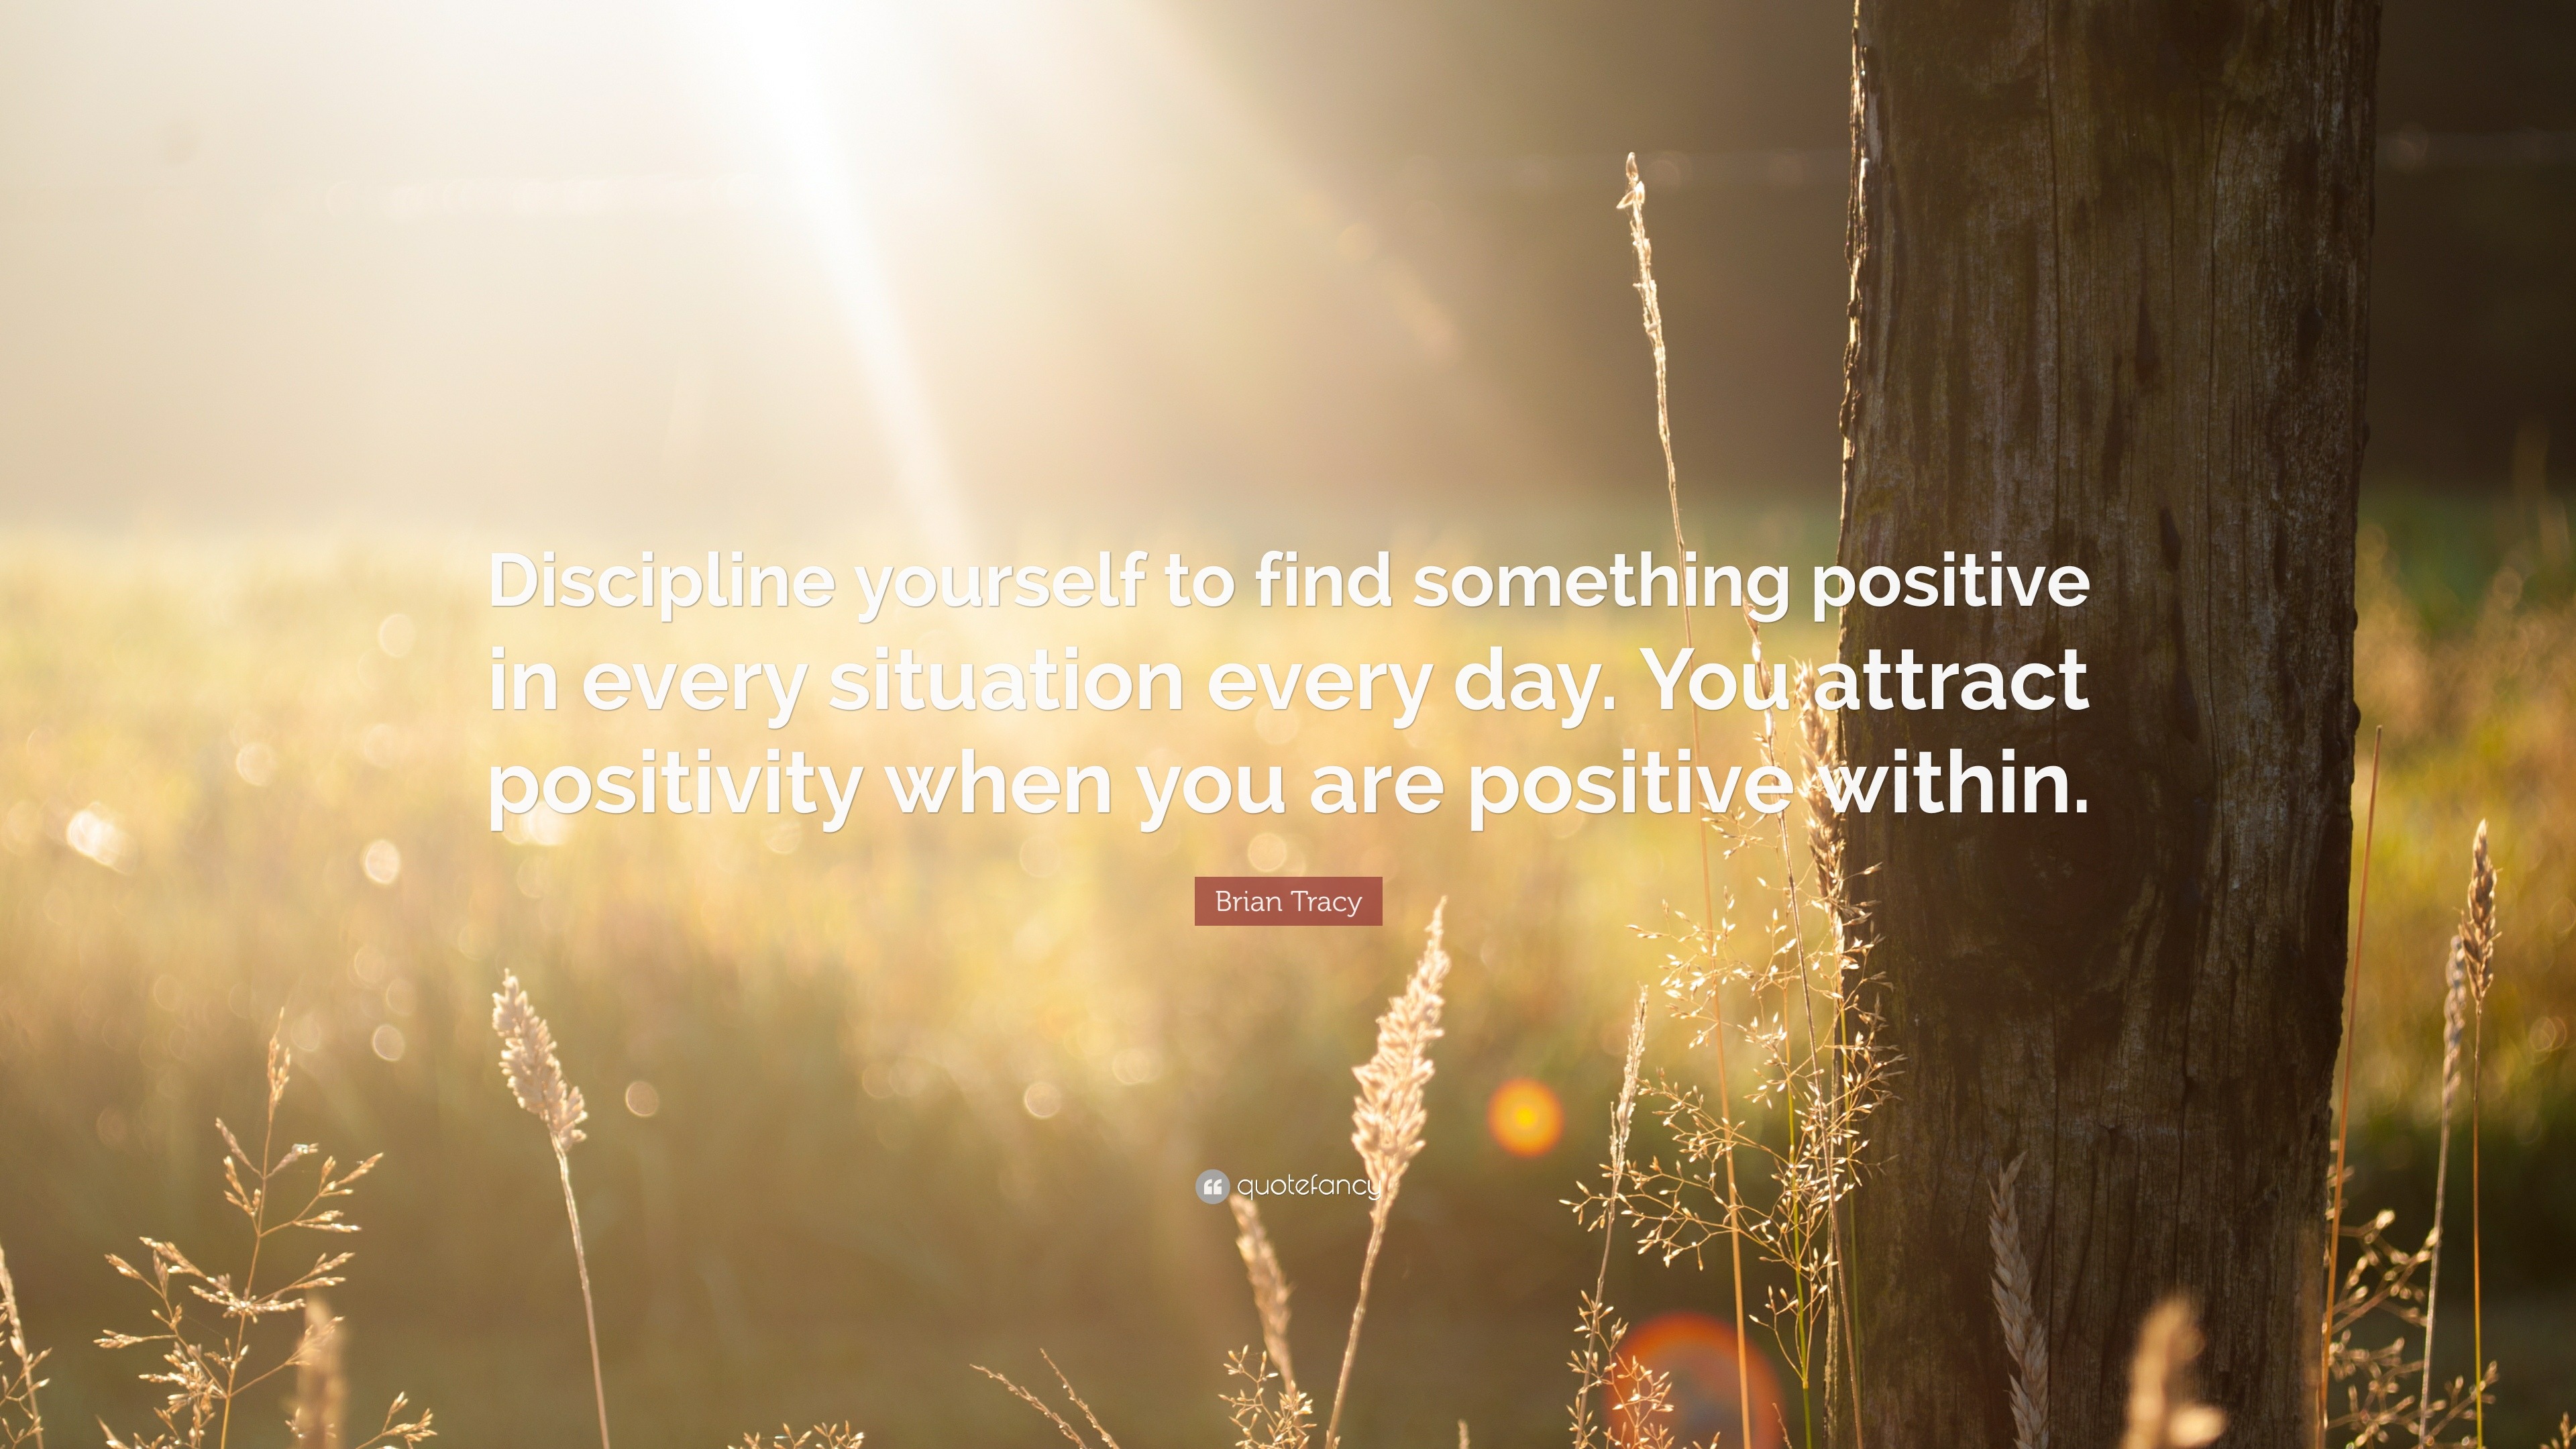 Brian Tracy Quote: “Discipline yourself to find something positive in